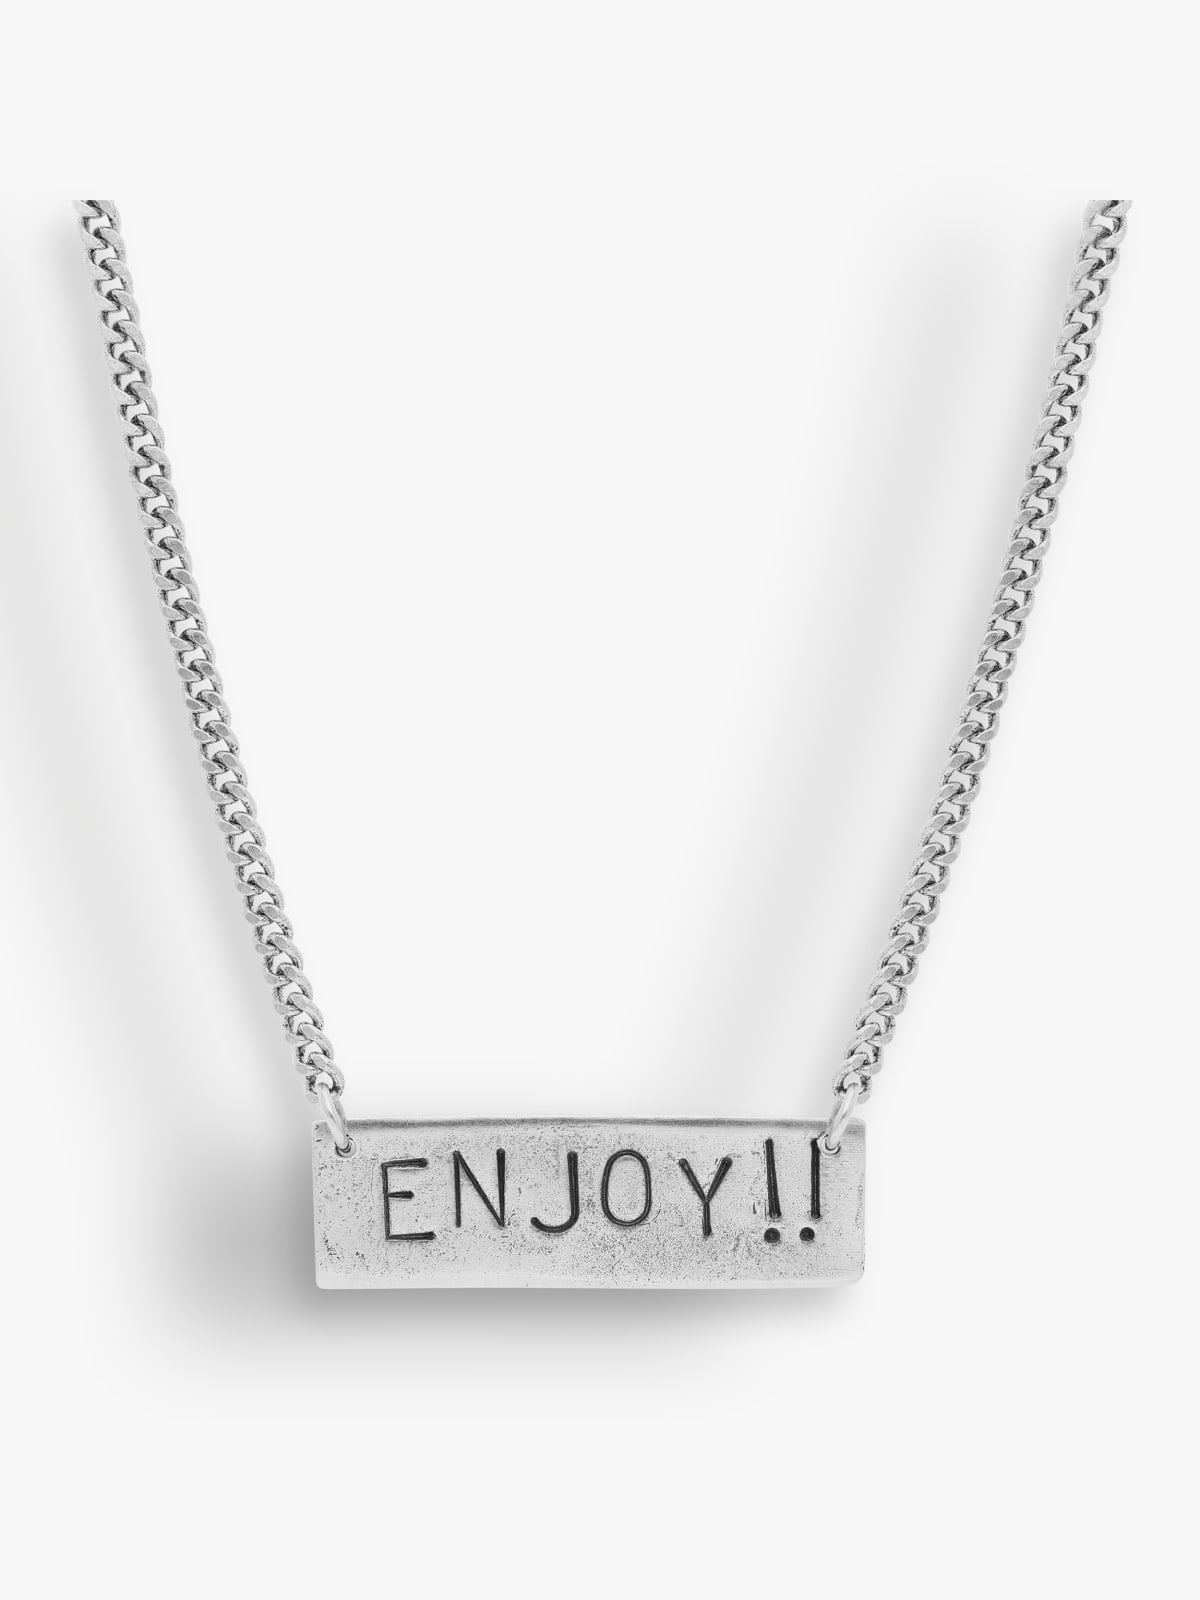 Enjoy necklace in silver-plated pewter